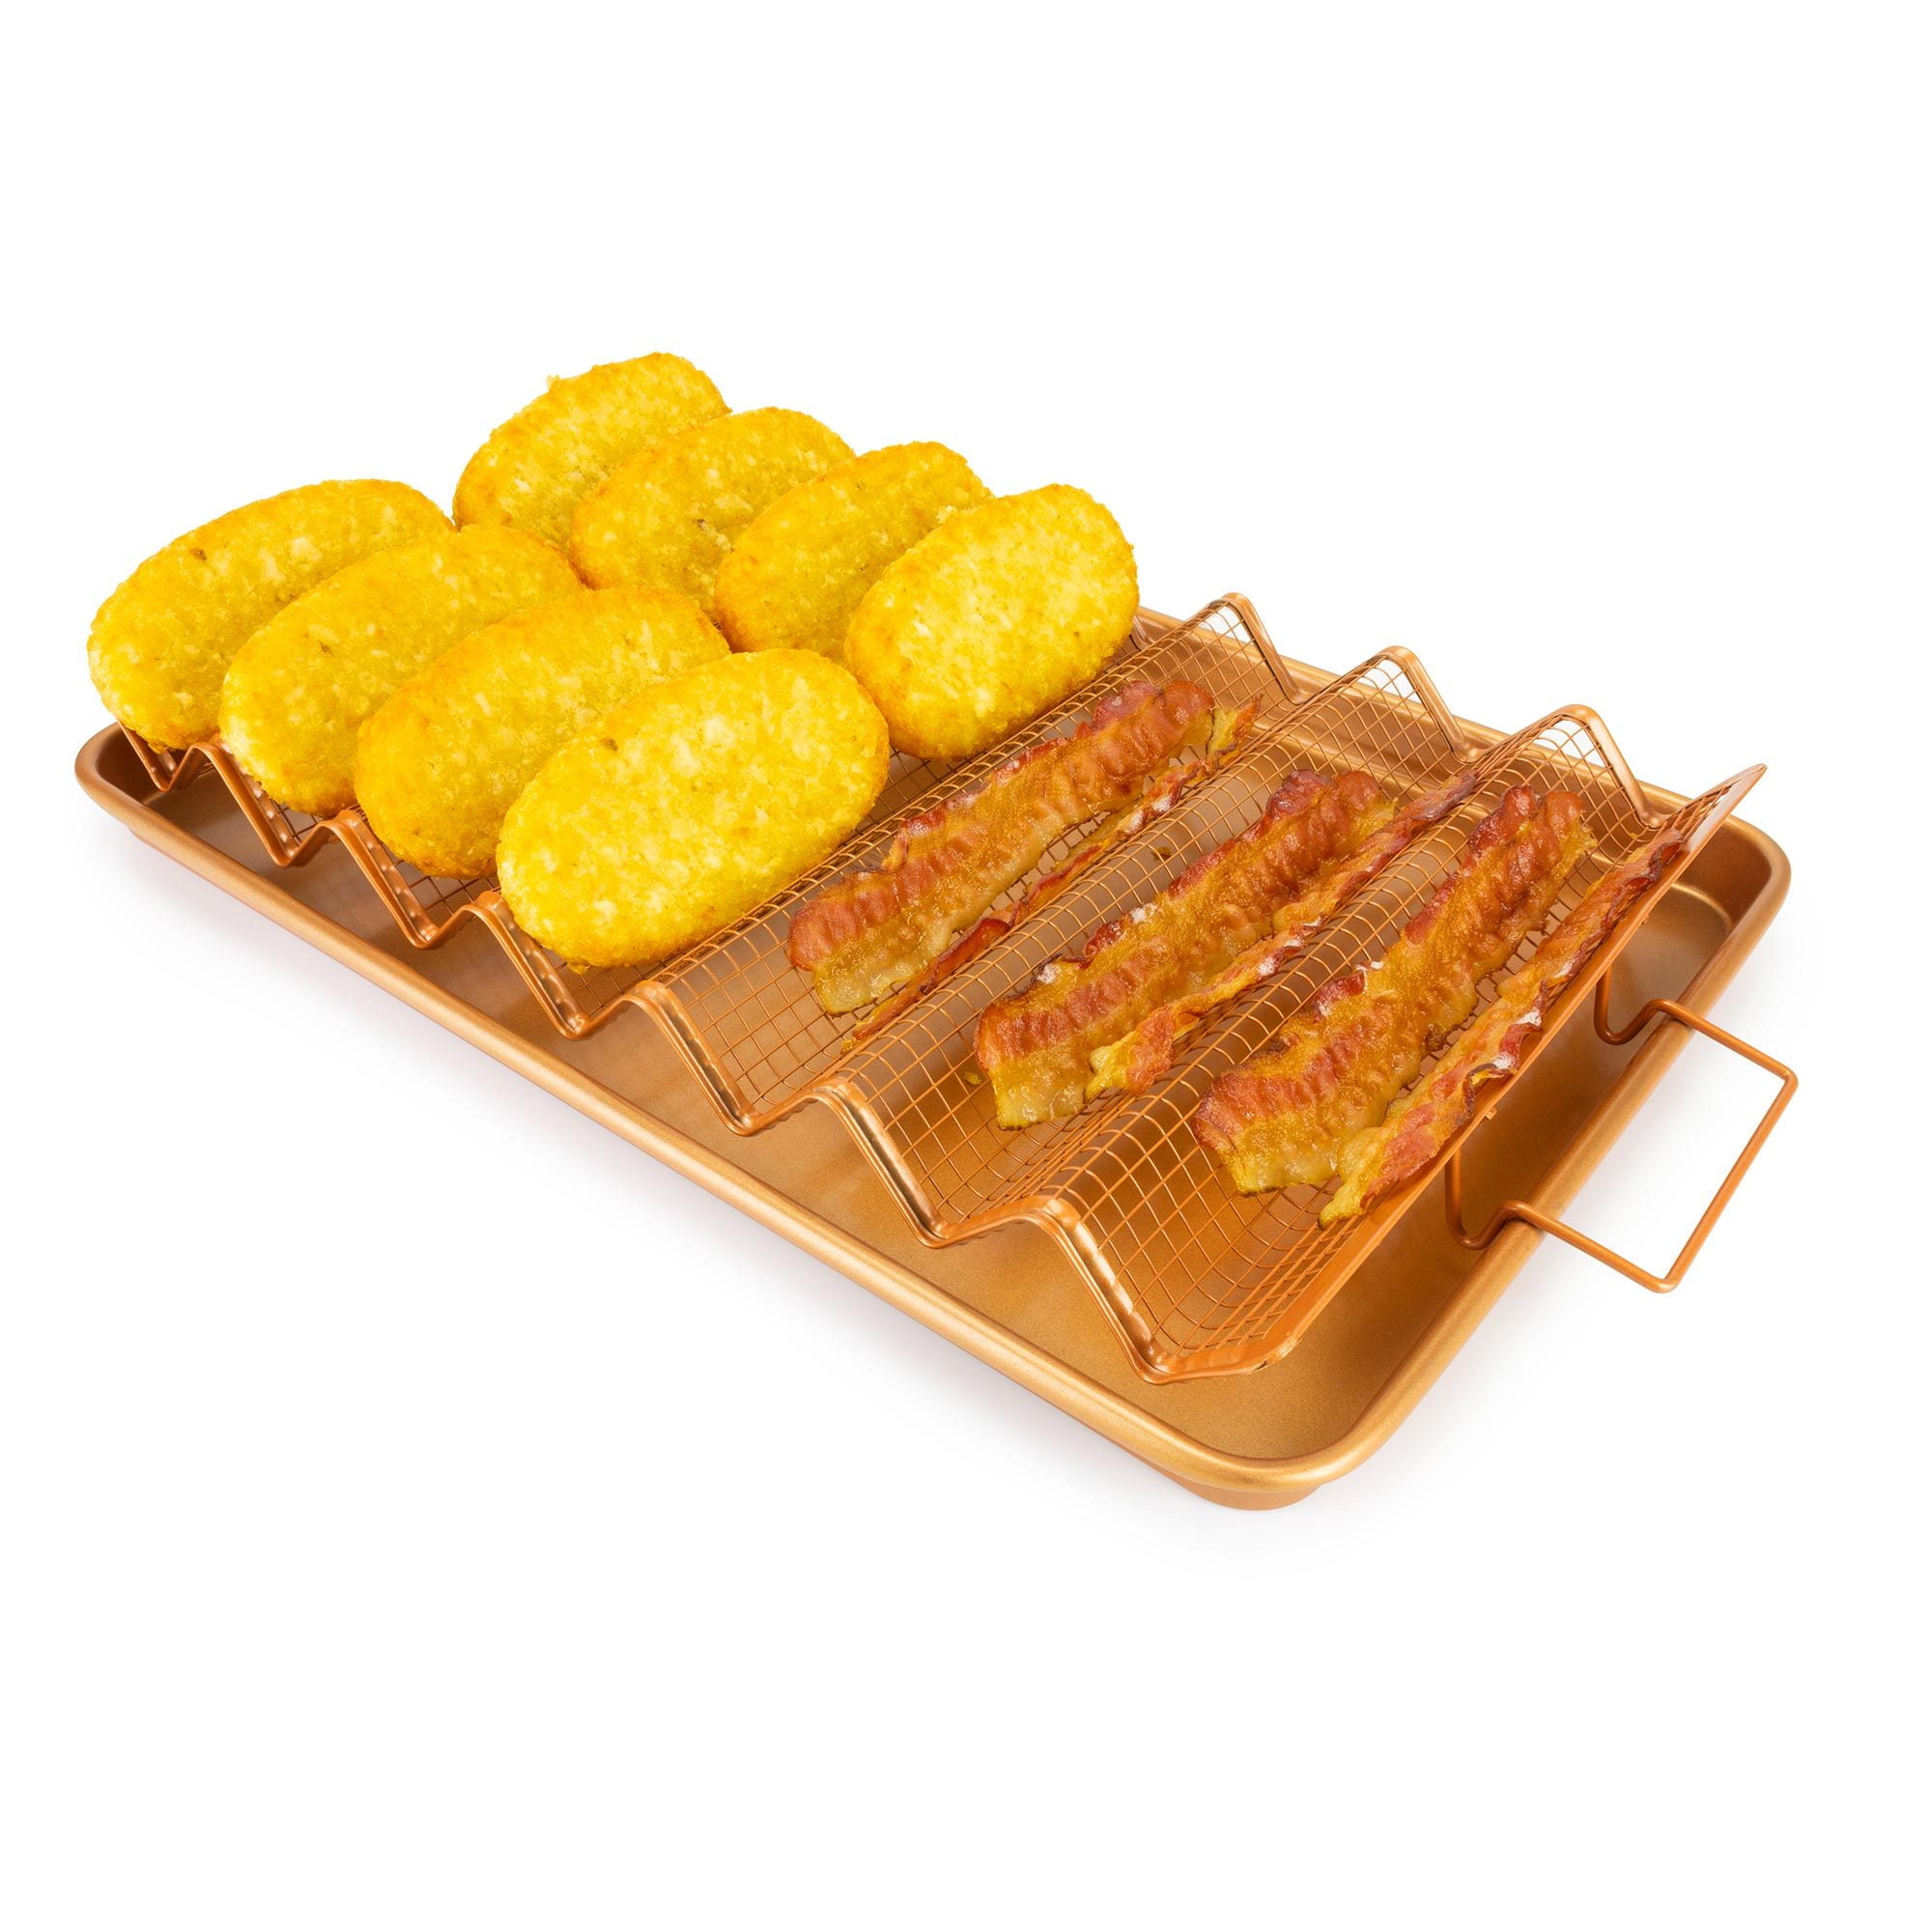 SKUSHOPS Crisper Tray Set Non Stick Cookie Sheet Tray Air Fry Pan Grill  Basket Oven Dishwasher